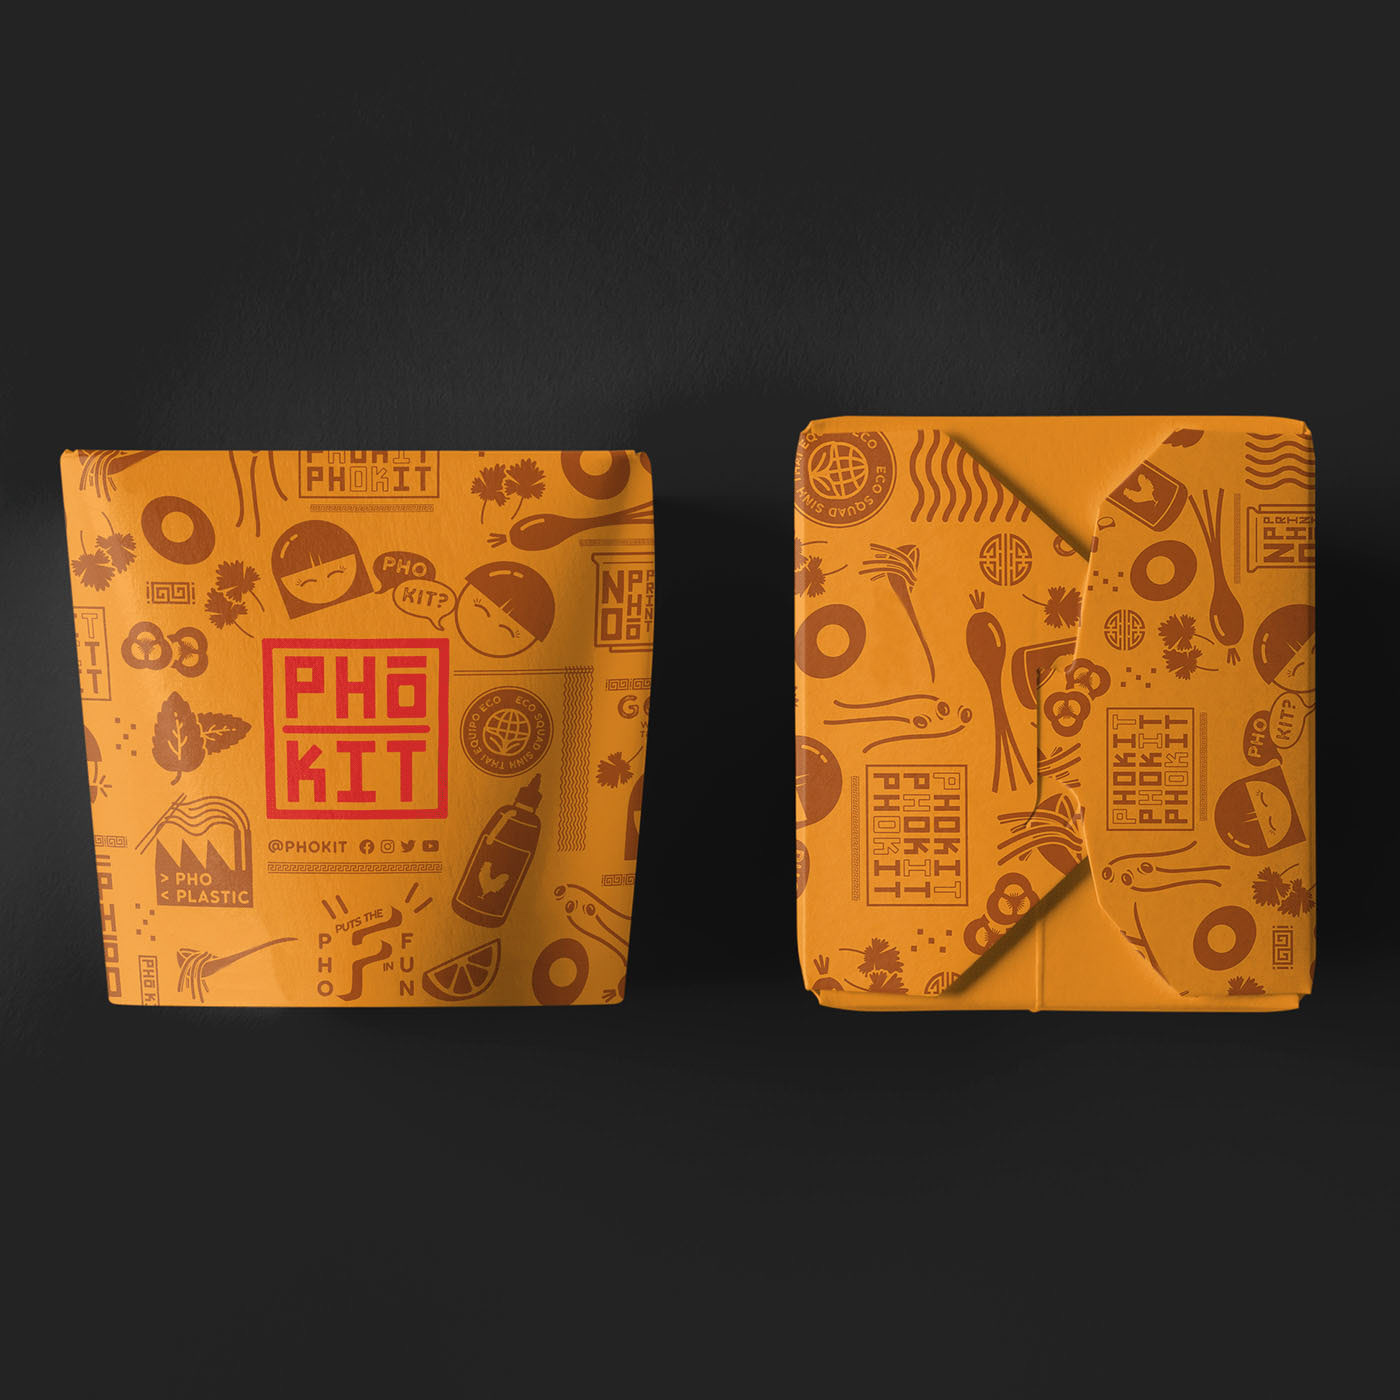 package design pho kit - luccaam rockford, Web Development Rockford, PPC Management